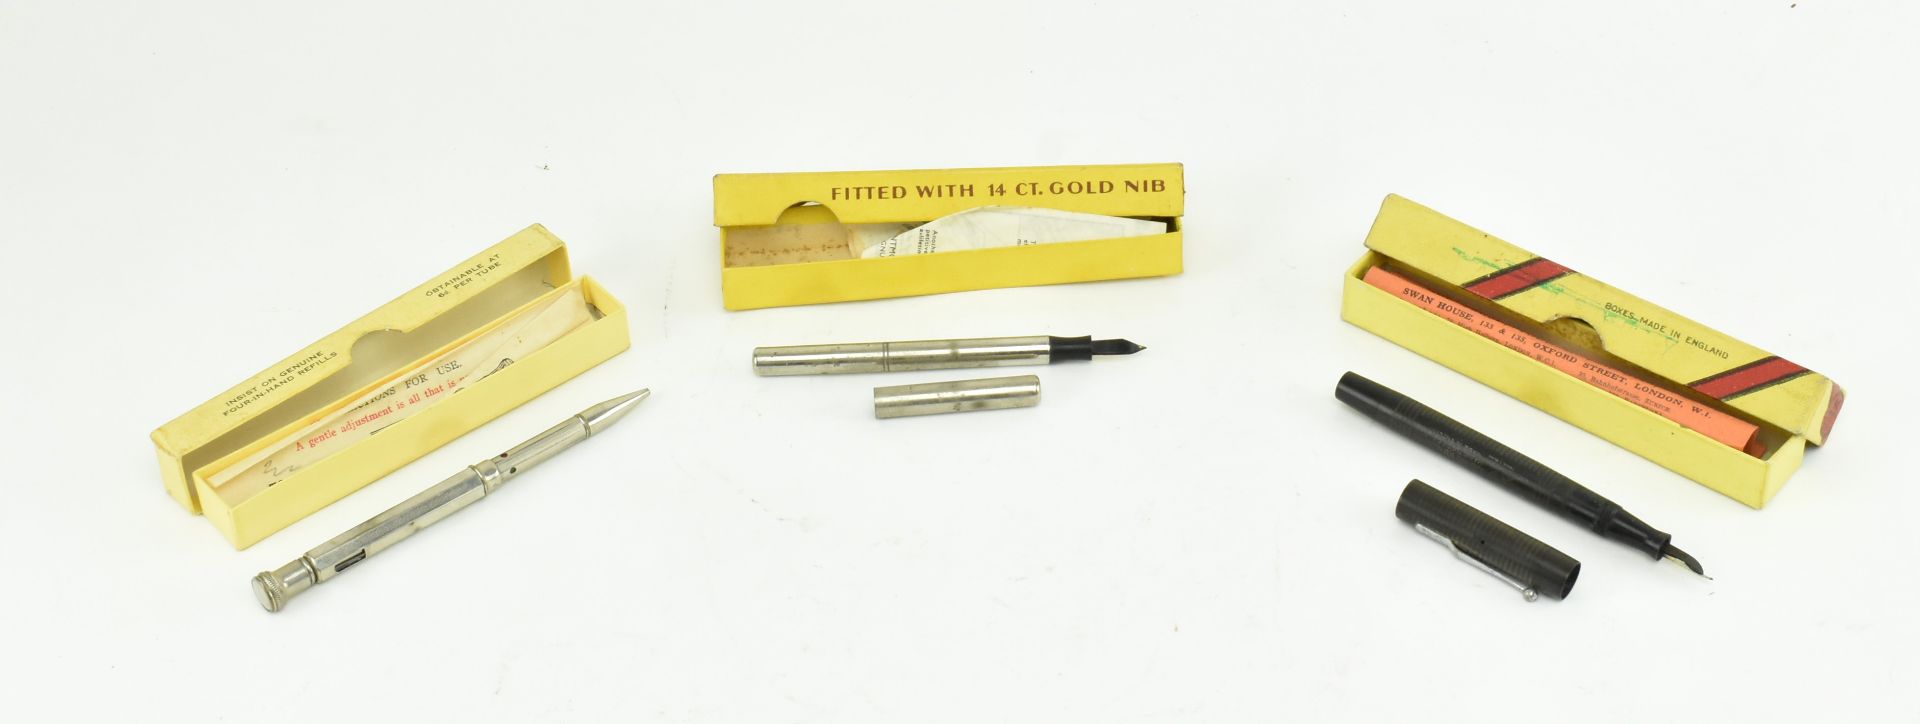 THREE EARLY - MID 20TH CENTURY CASED PENS / PENCILS